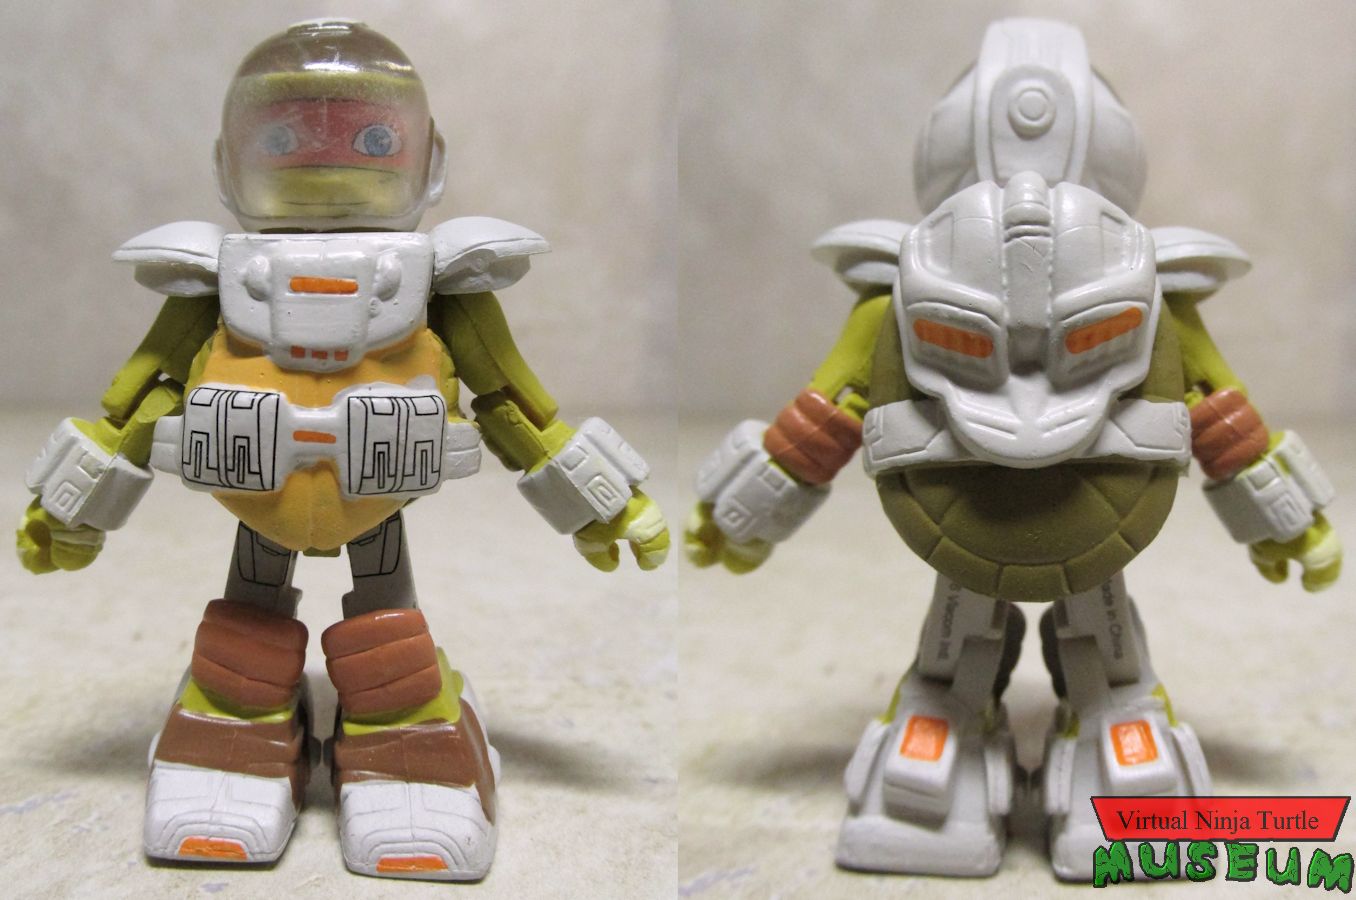 Space Suit Michelangelo front and back